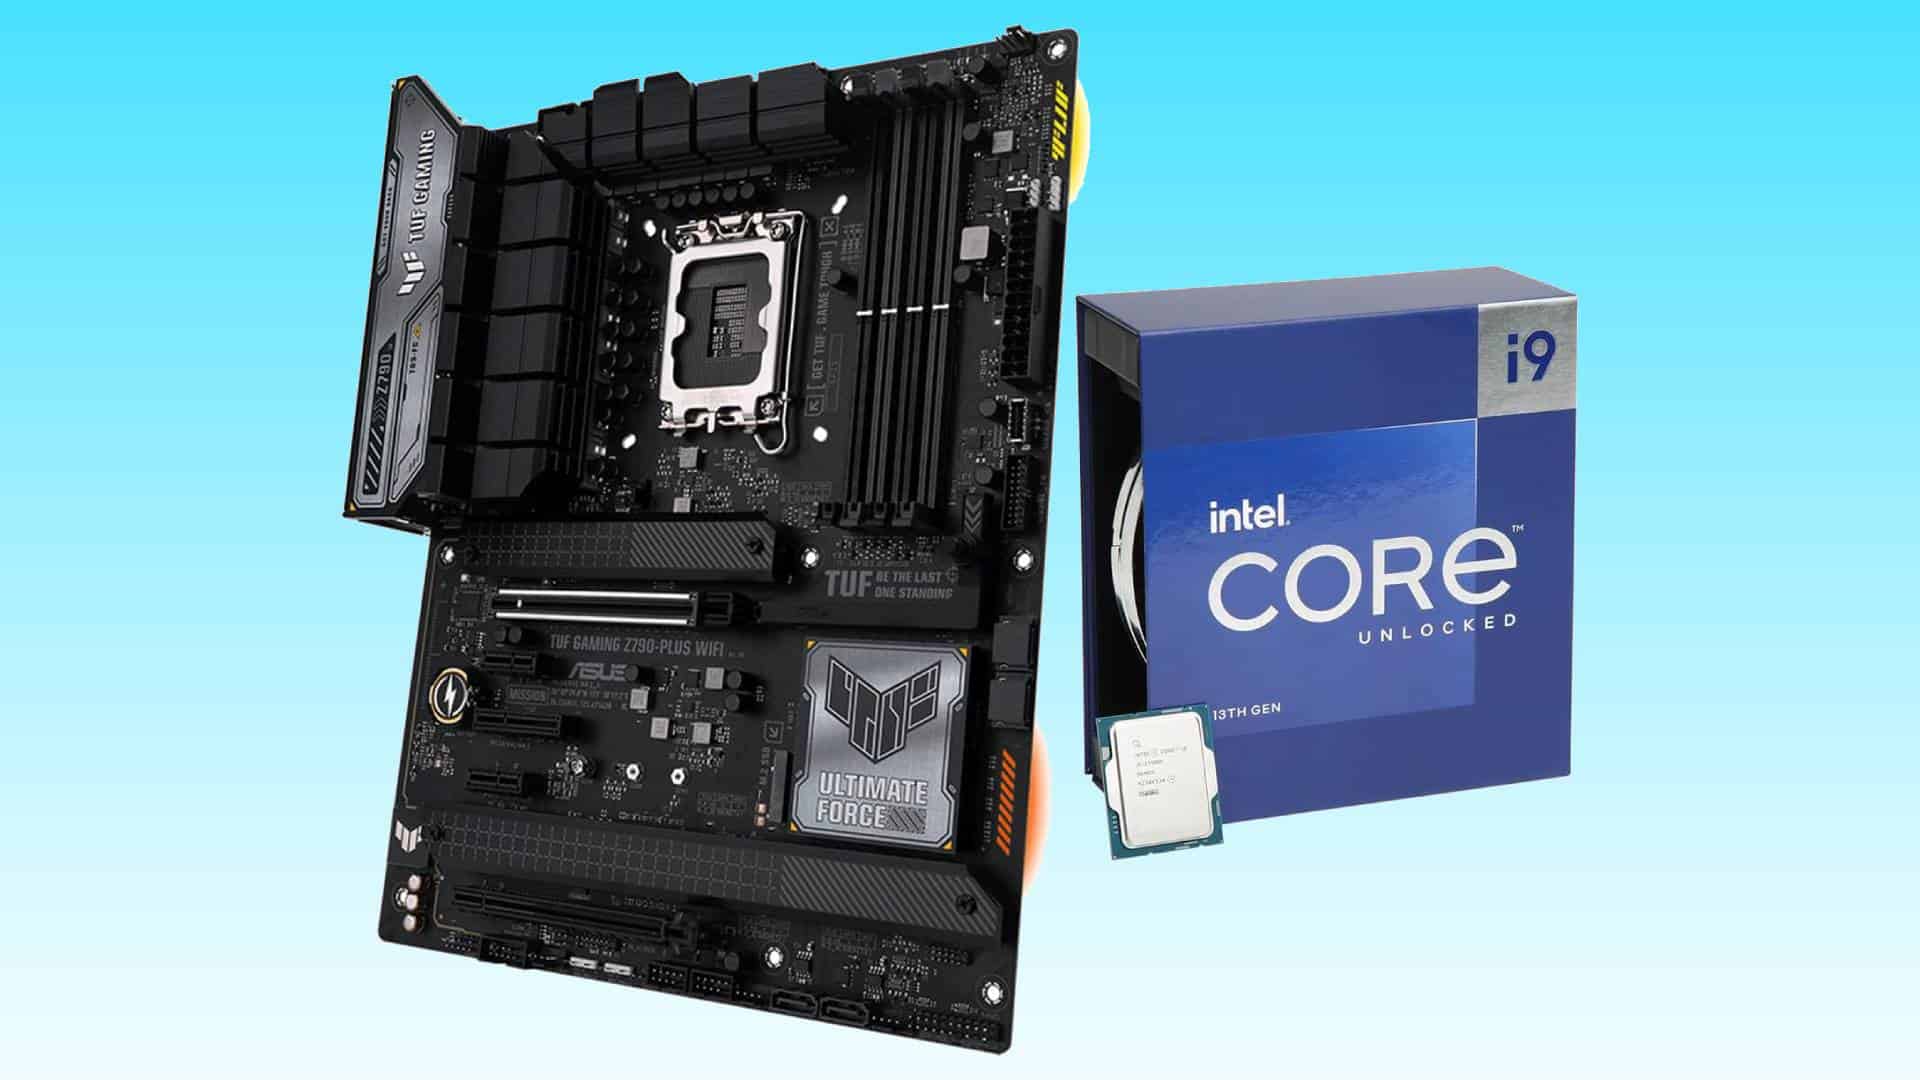 Motherboard and Intel Core i9 processor with packaging on a blue background, featured as part of the best CPU and motherboard bundle deals.